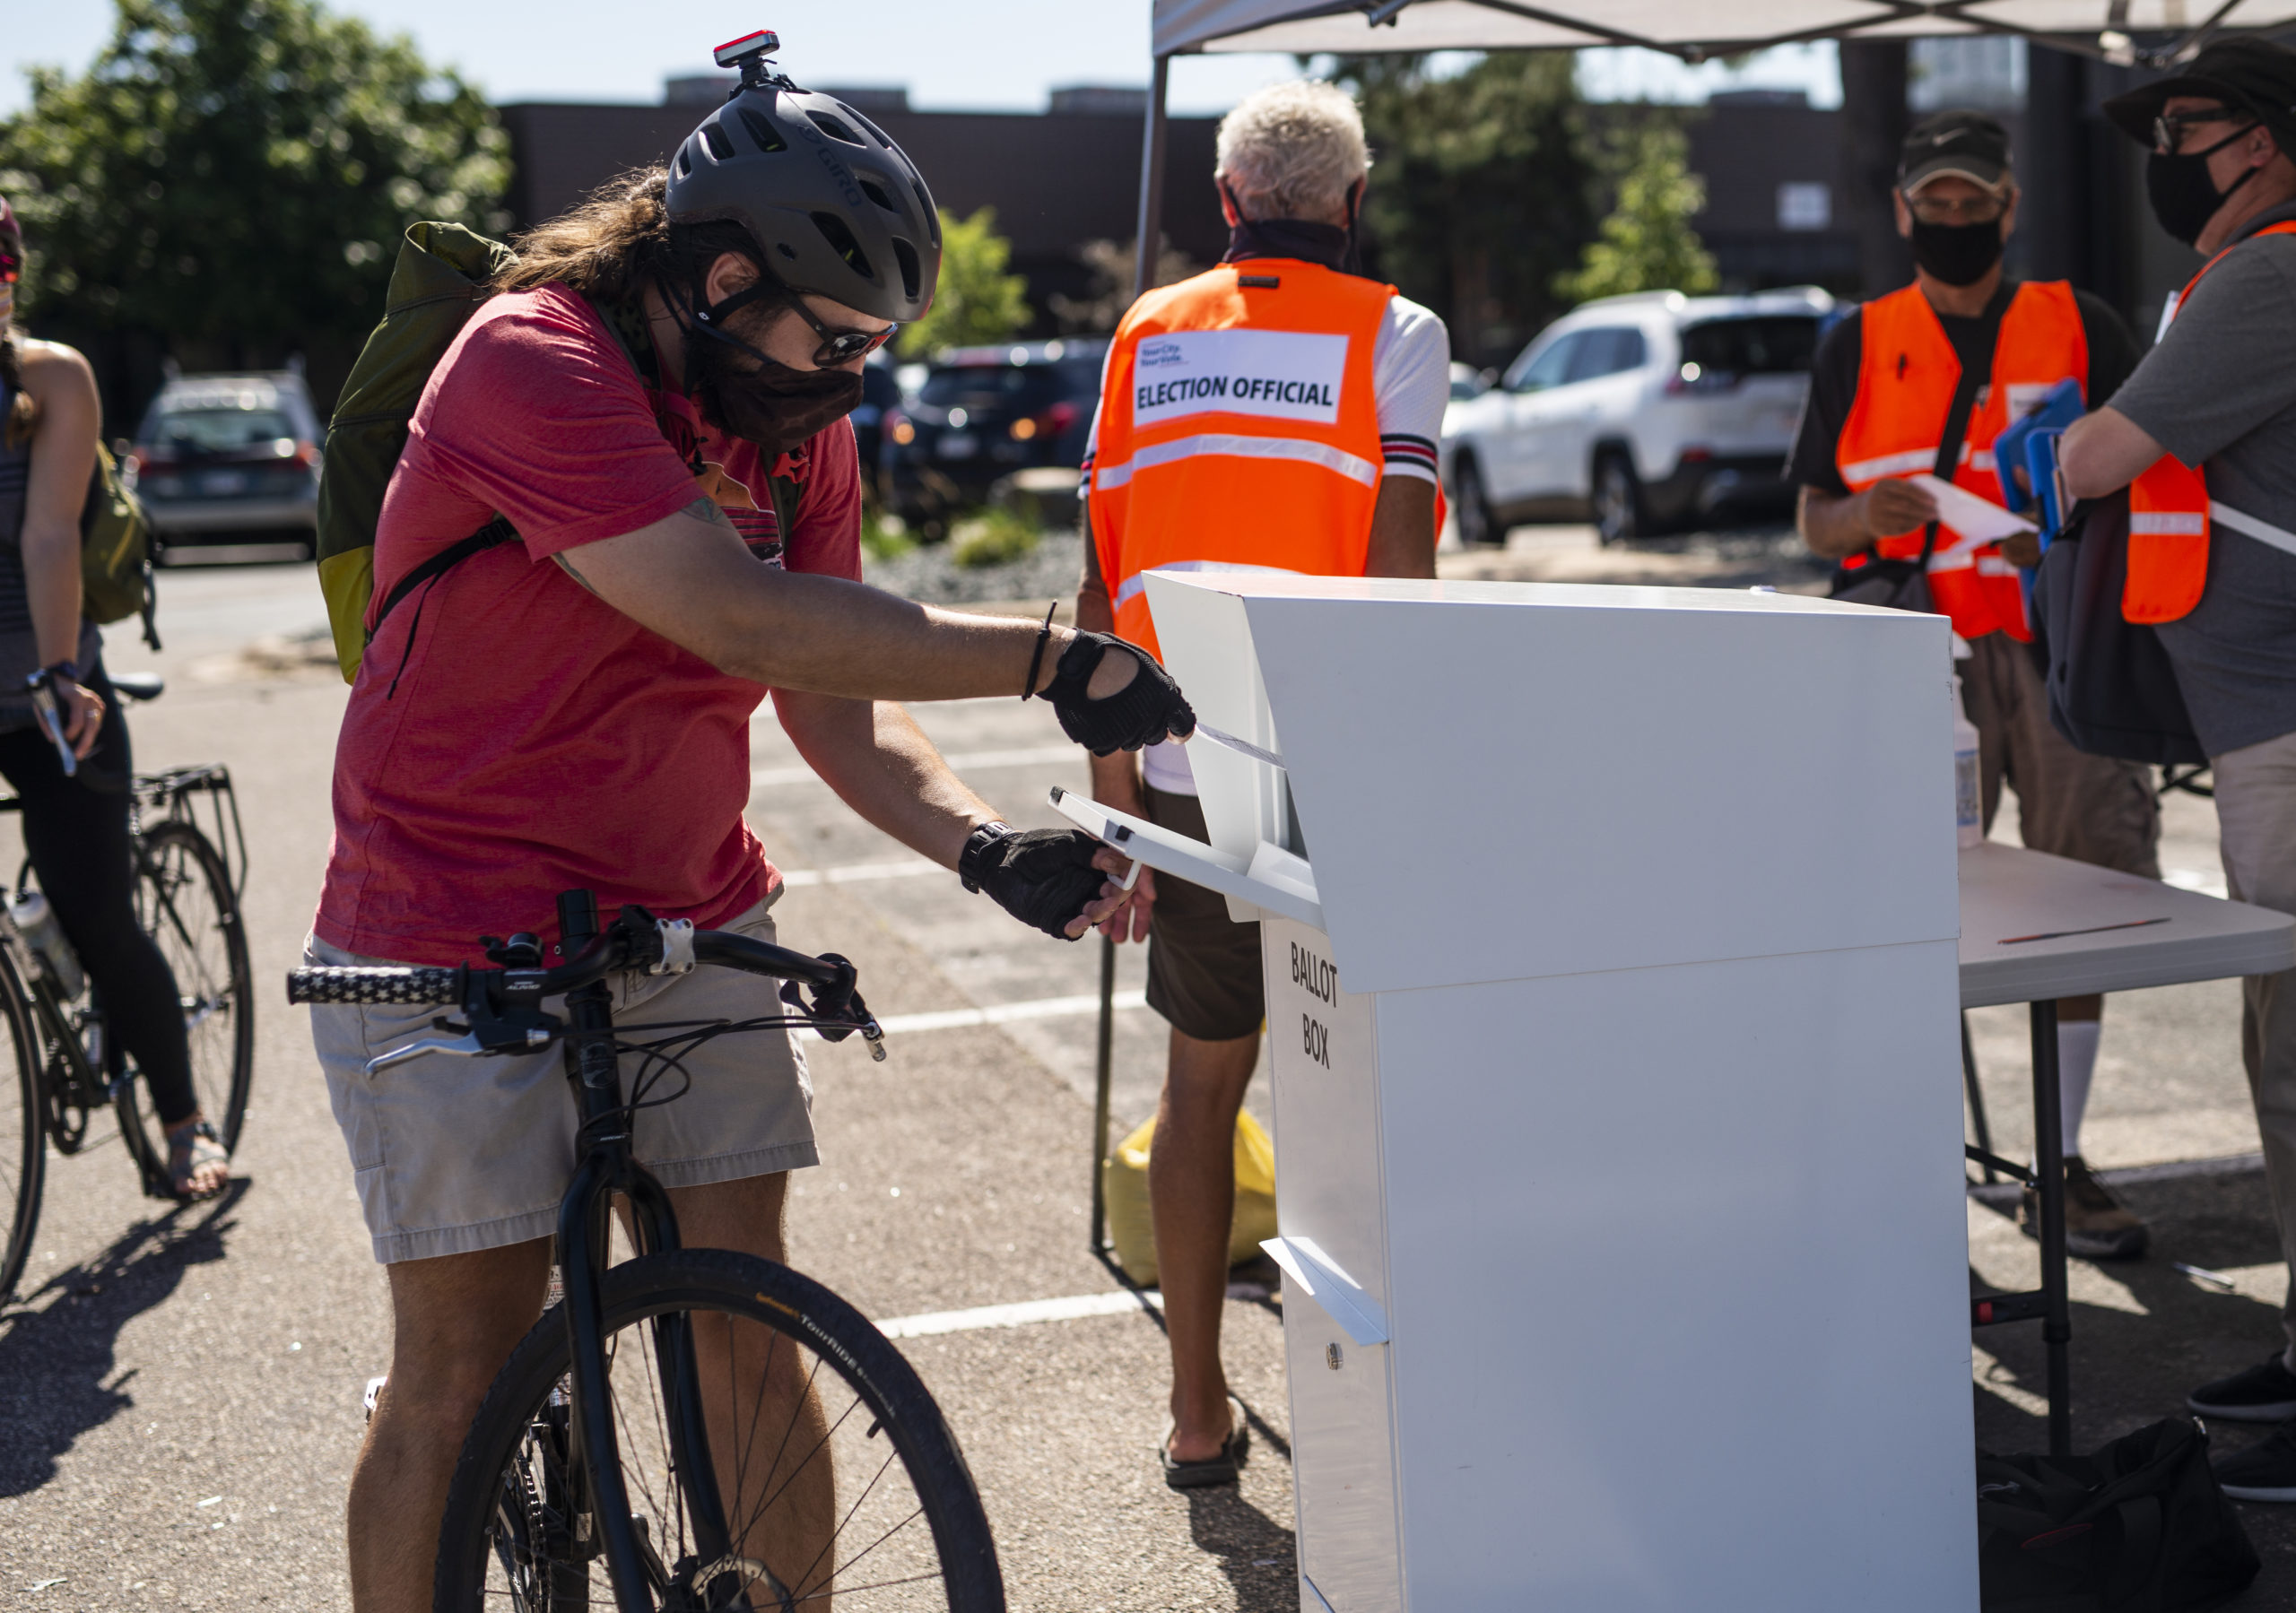 MINNEAPOLIS, MN - AUGUST 11: A voter on bicycle drops off their ballot at a drive through drop-off for absentee ballots on August 11, 2020 in Minneapolis, Minnesota. Voters in Minneapolis were able to drop off their mail-in ballots in person at two different locations, which were made available temporarily to assuage fears of delay in USPS delivery. (Photo by Stephen Maturen/Getty Images)